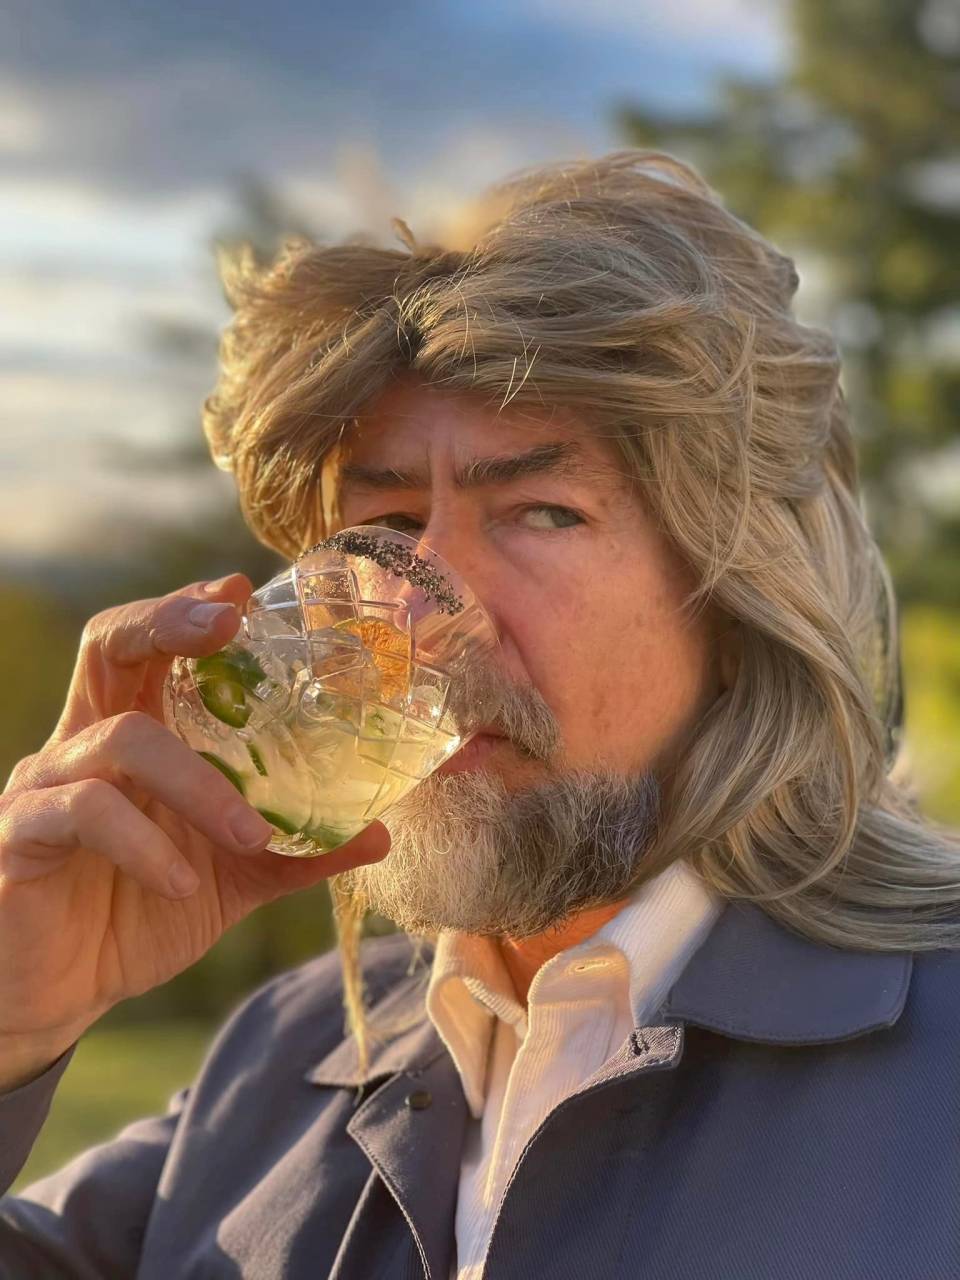 Director Steve Miller, drinking from a pepper-rimmed cocktail glass, golden sunlight illuminating his face as he looks slyly to his left.